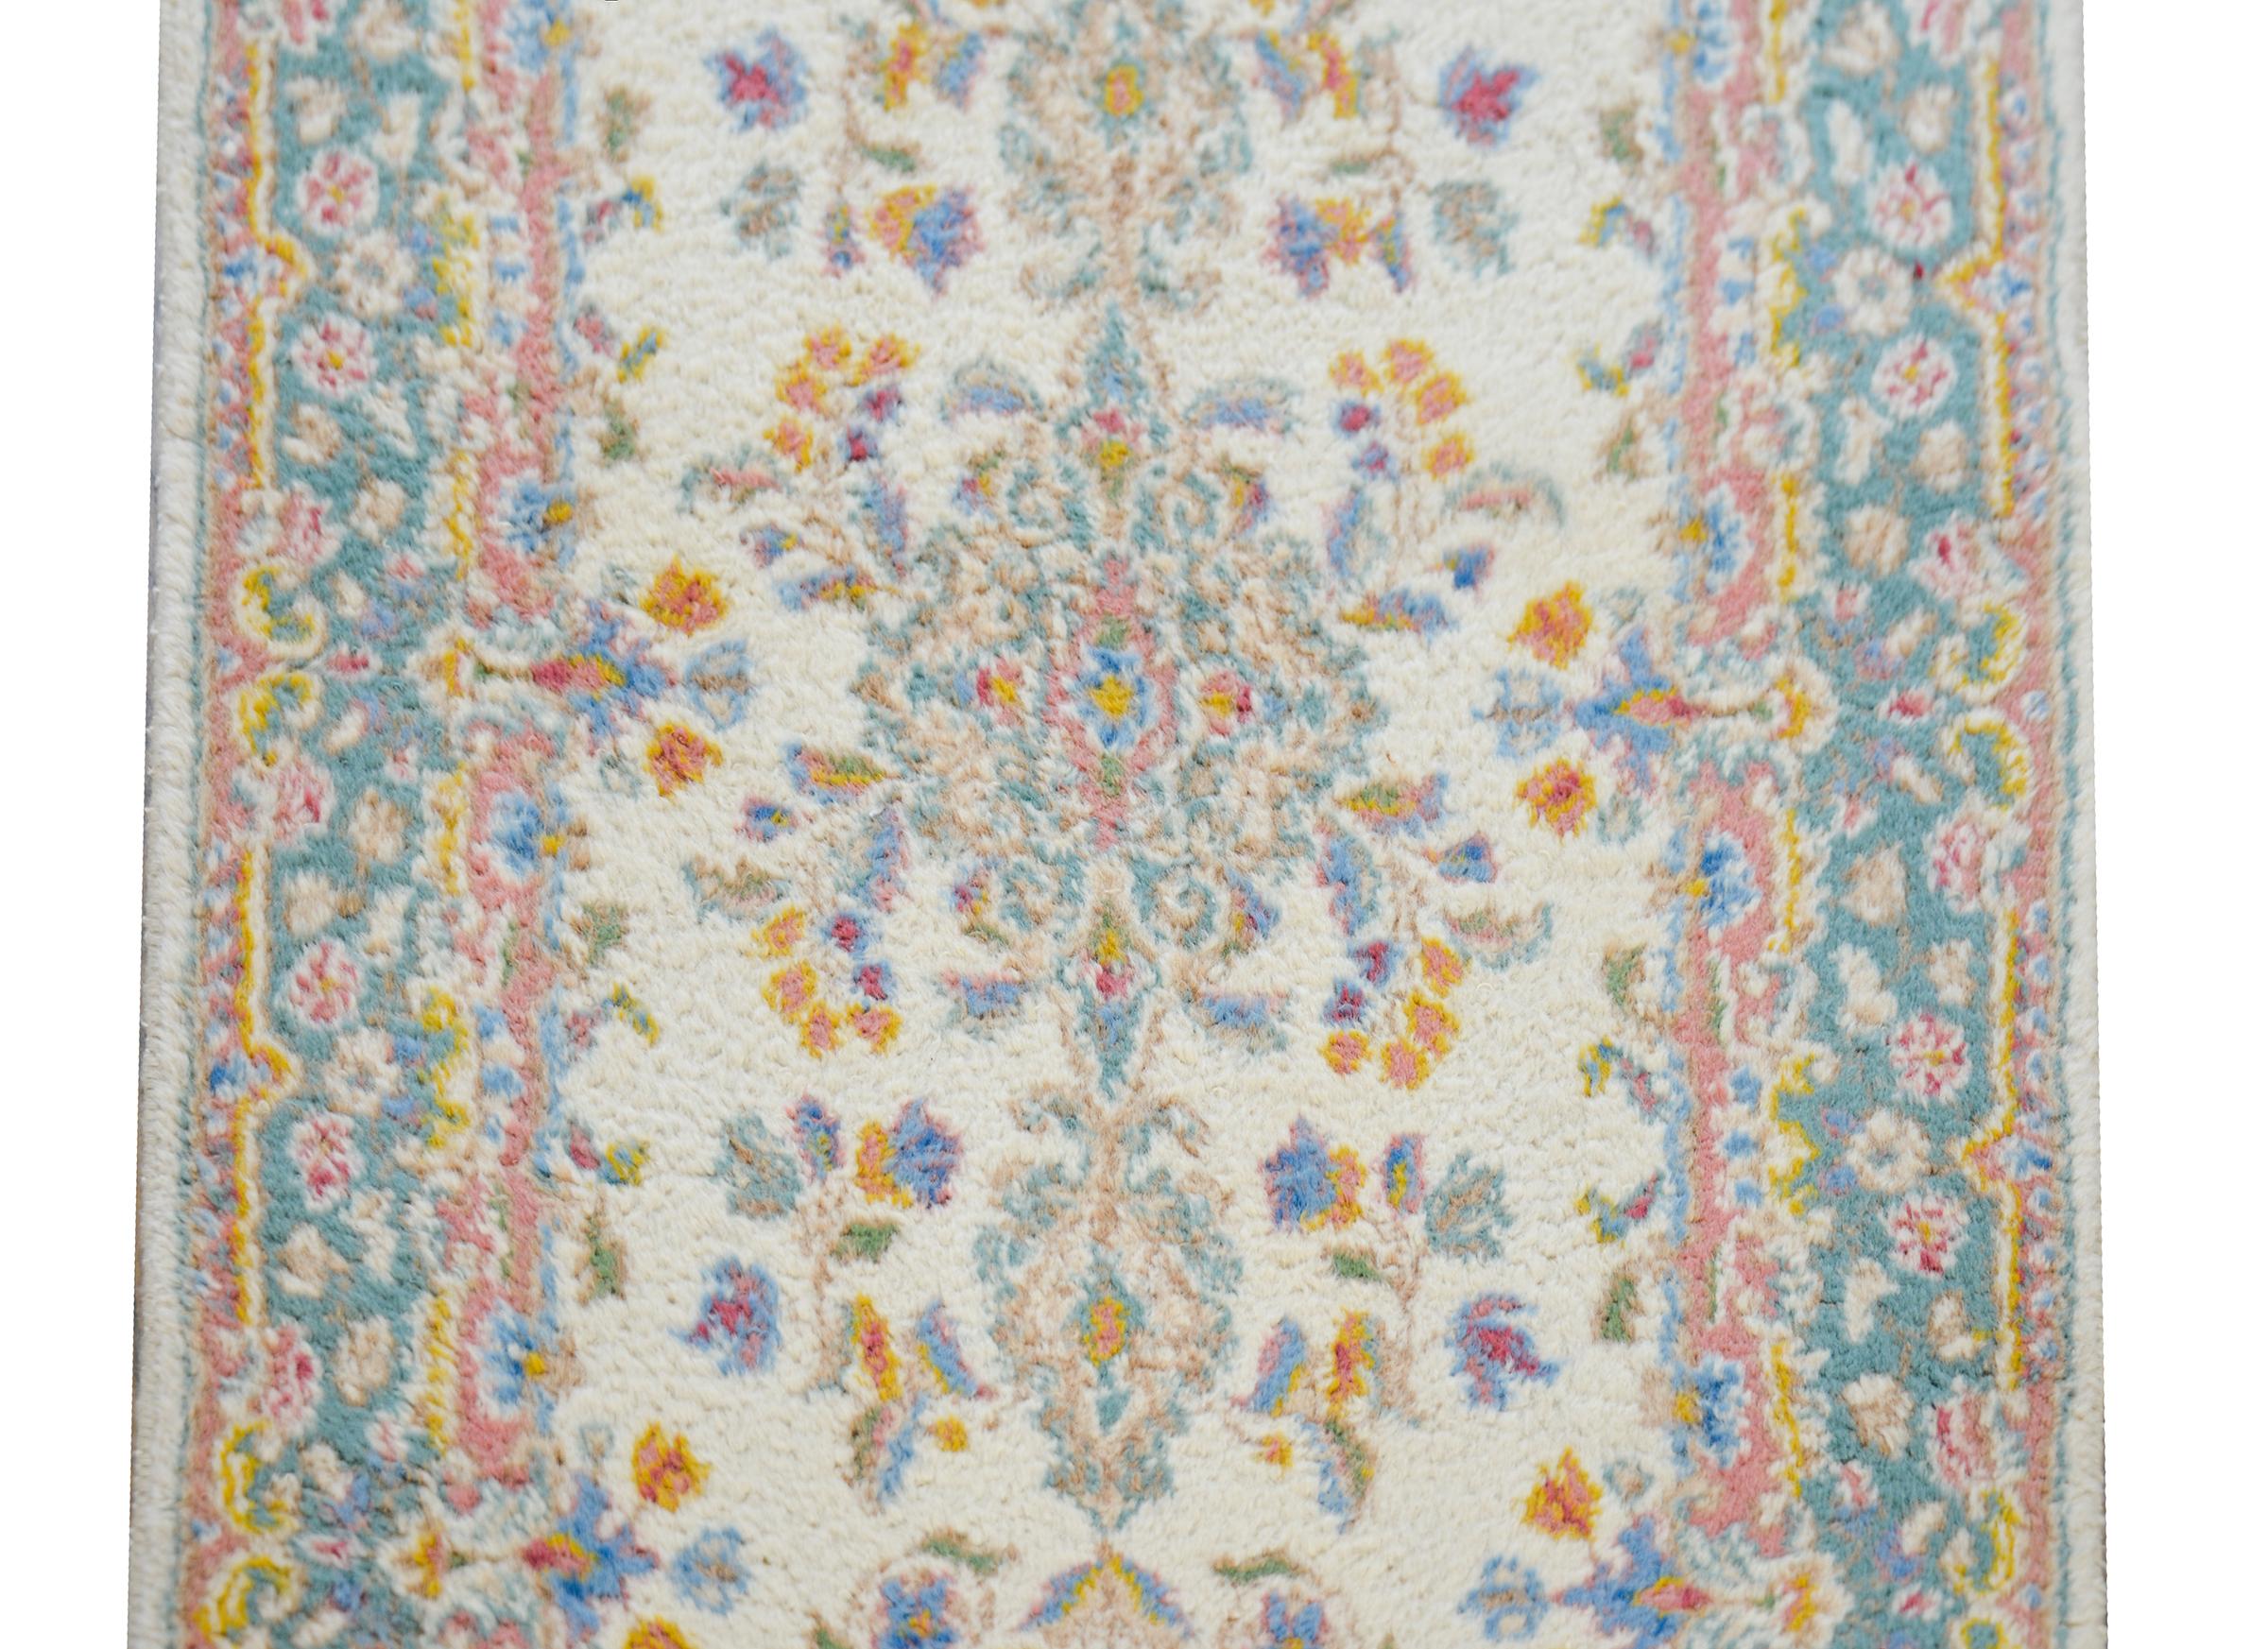 A beautiful early 20th century Persian Kirman runner with a sweet petite floral pattern woven in pinks, golds, oranges, and indigos set against a cream colored ground, and surrounded by a complementary floral patterned border.